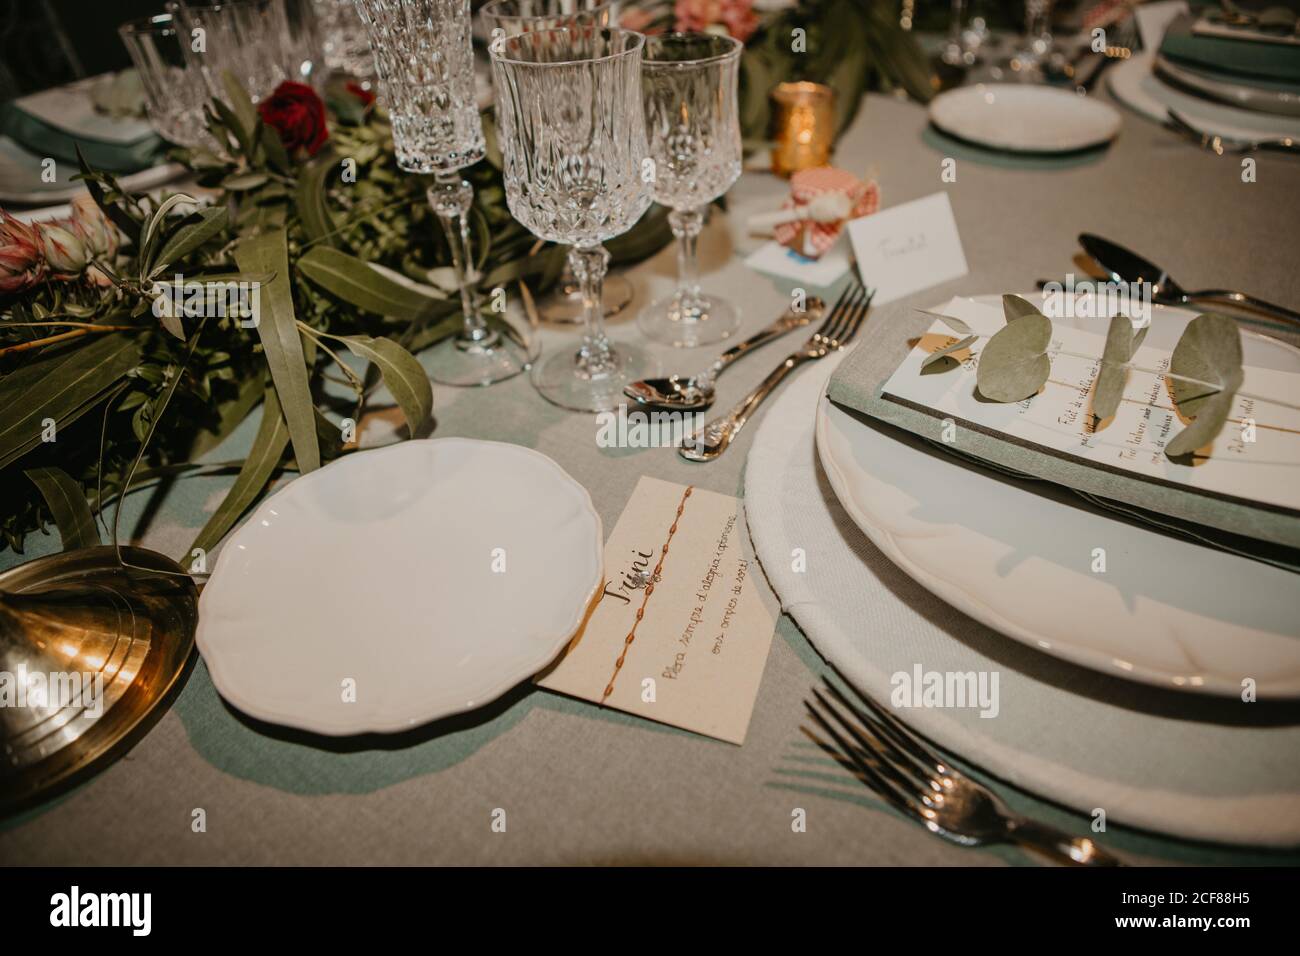 Various dishware and name card arranged with flowers and elegant glassware on table for wedding reception Stock Photo